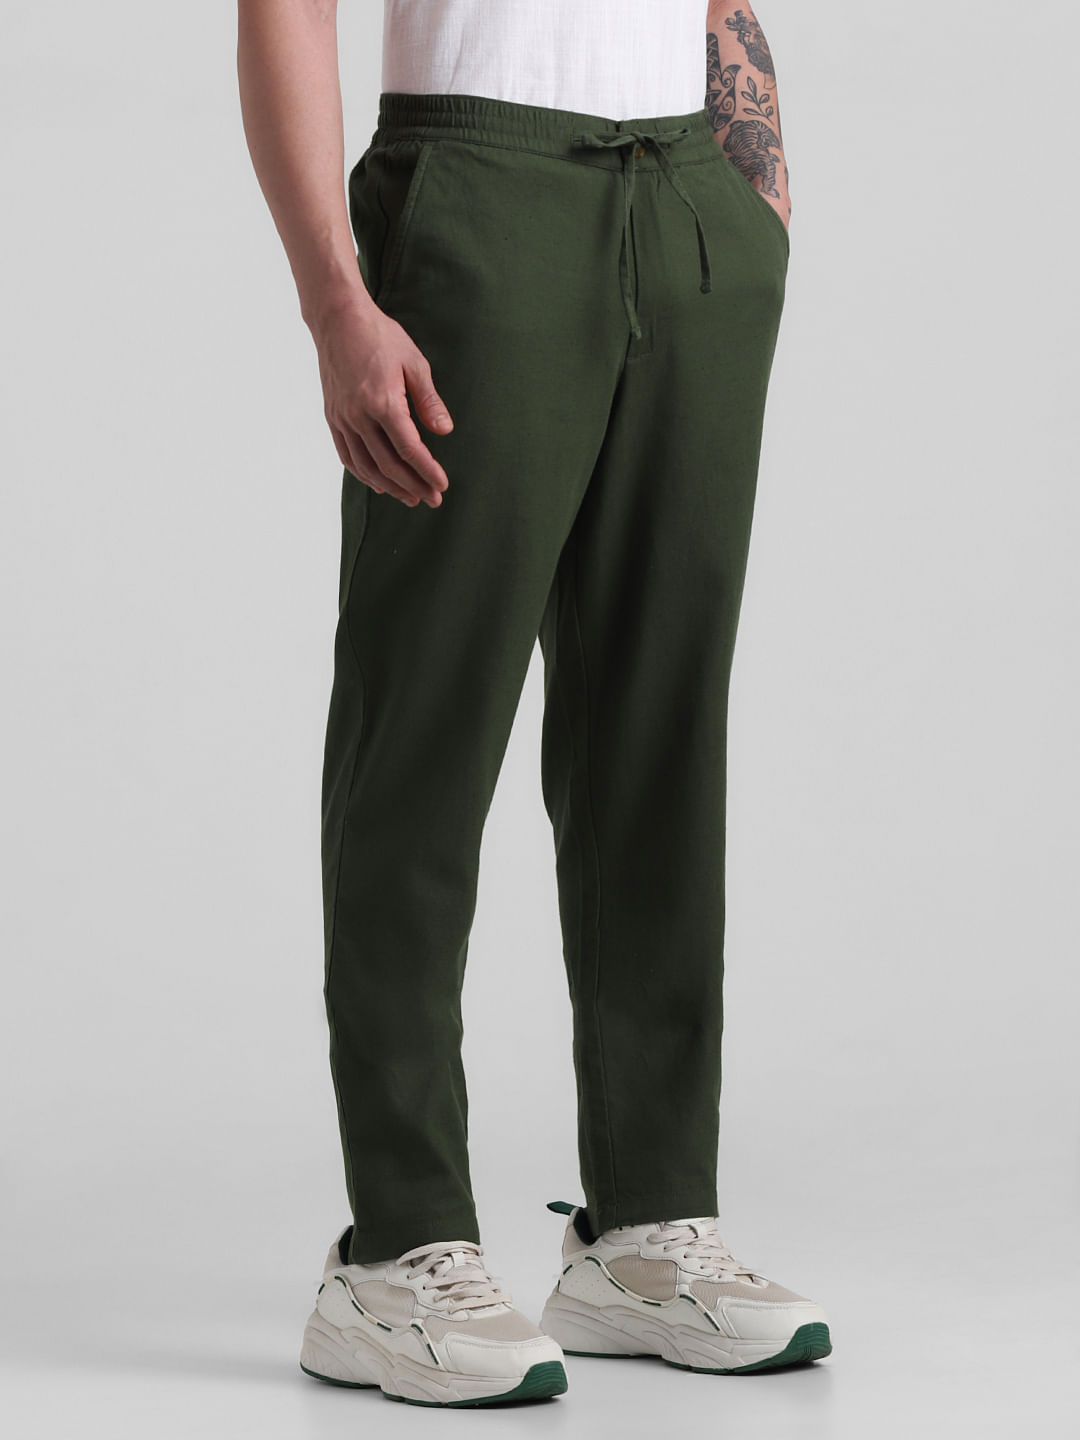 Chiclily Women's Wide Leg Lounge Pants with Pockets Lightweight High  Waisted Adjustable Tie Knot Loose Trousers, US Size Medium in Dark Green -  Walmart.com